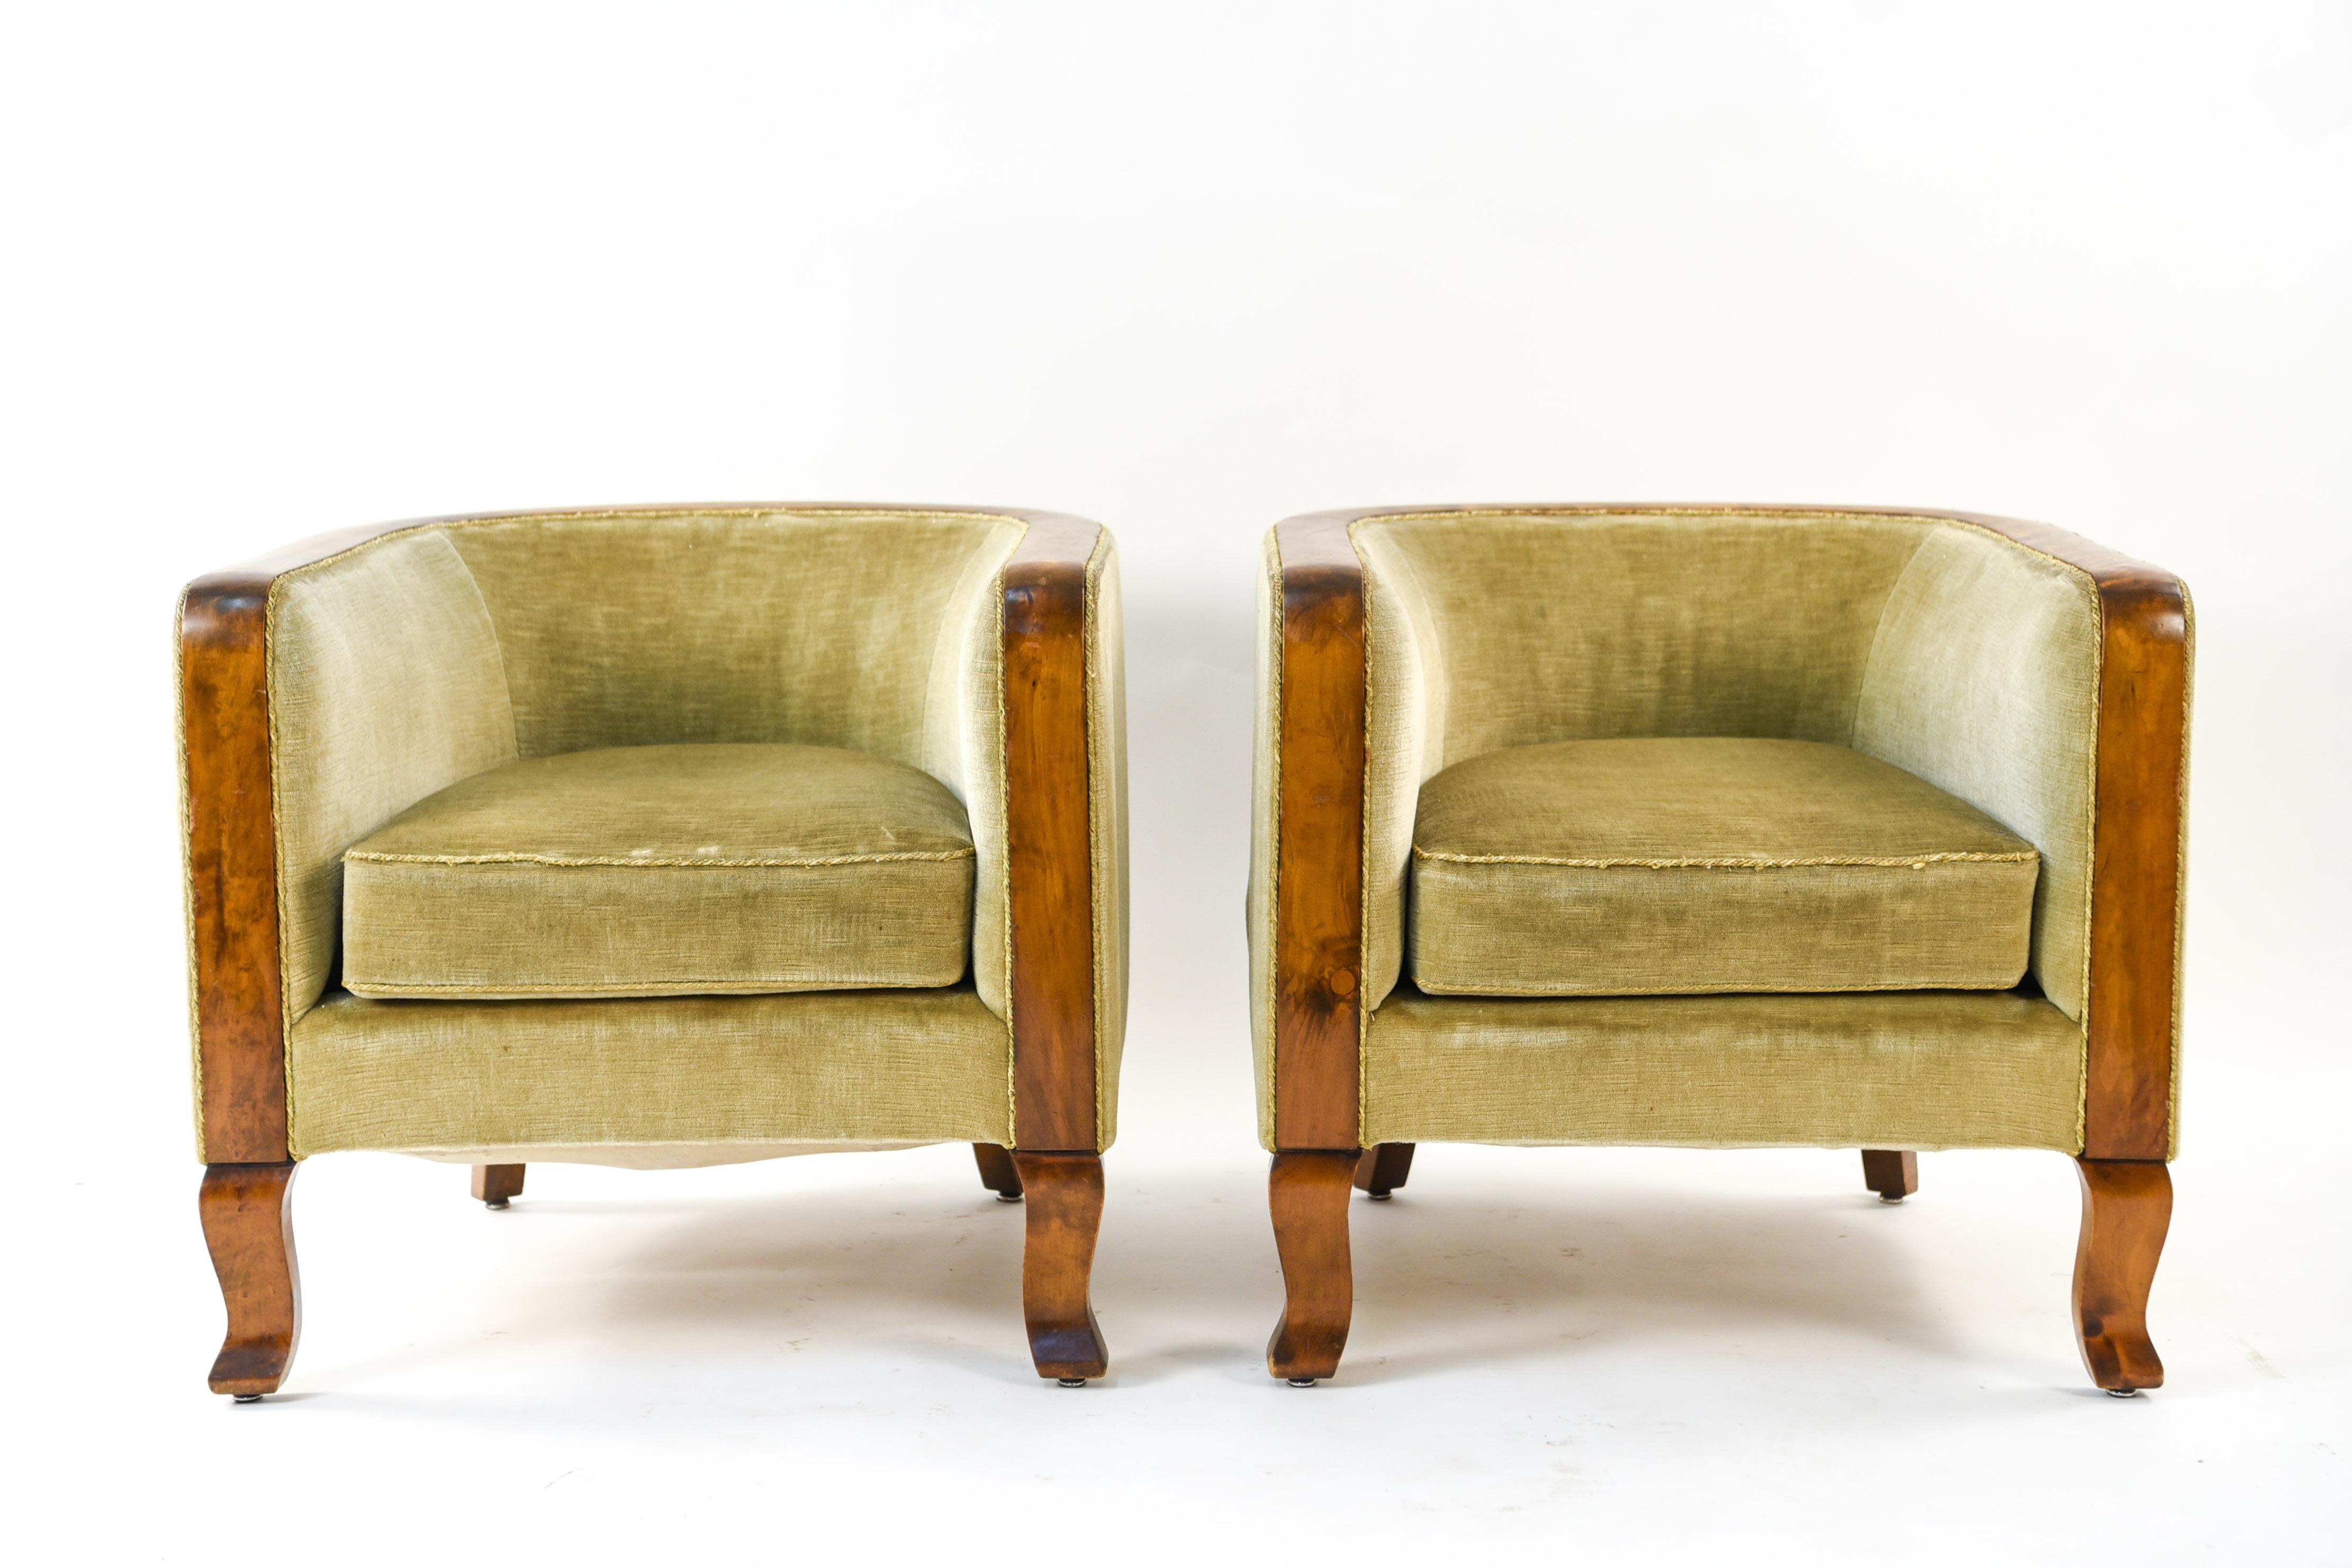 This pair of Danish Art Deco club chairs date to the 1940s and feature a lovely wood trim around the sides and back. A great example of the Art Deco style that retains its timeless desirability.